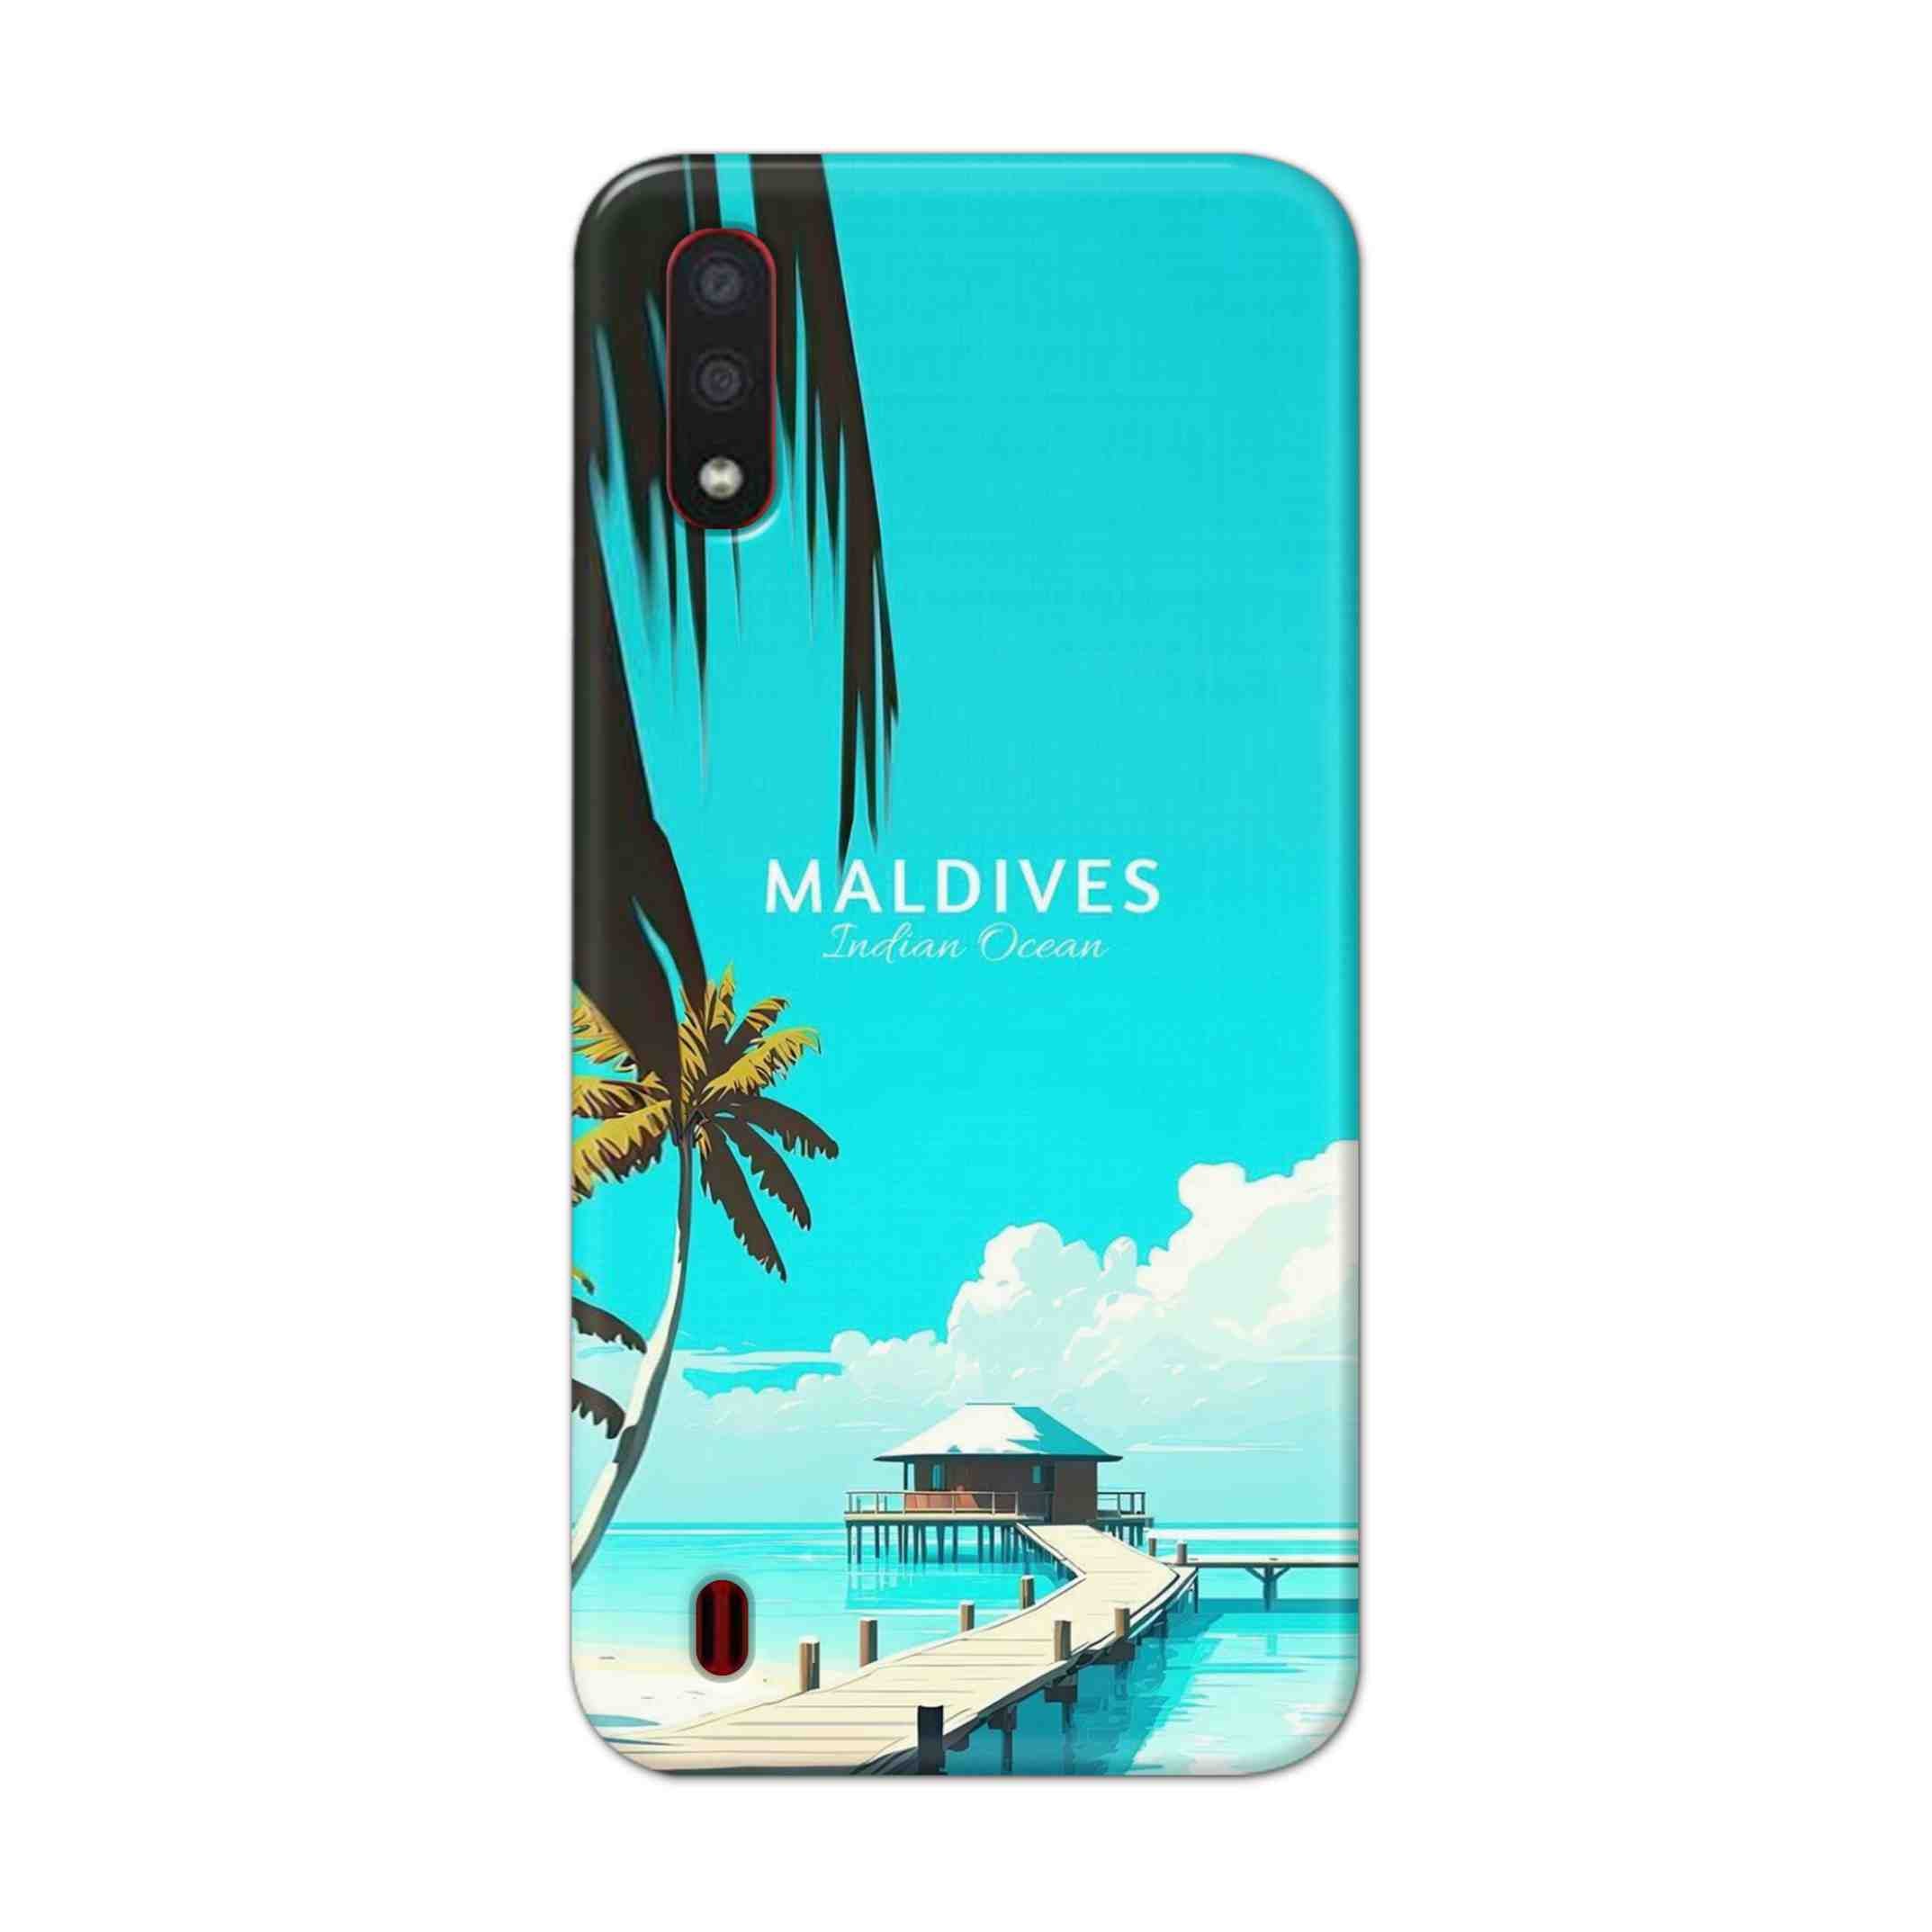 Buy Maldives Hard Back Mobile Phone Case/Cover For Samsung Galaxy M01 Online